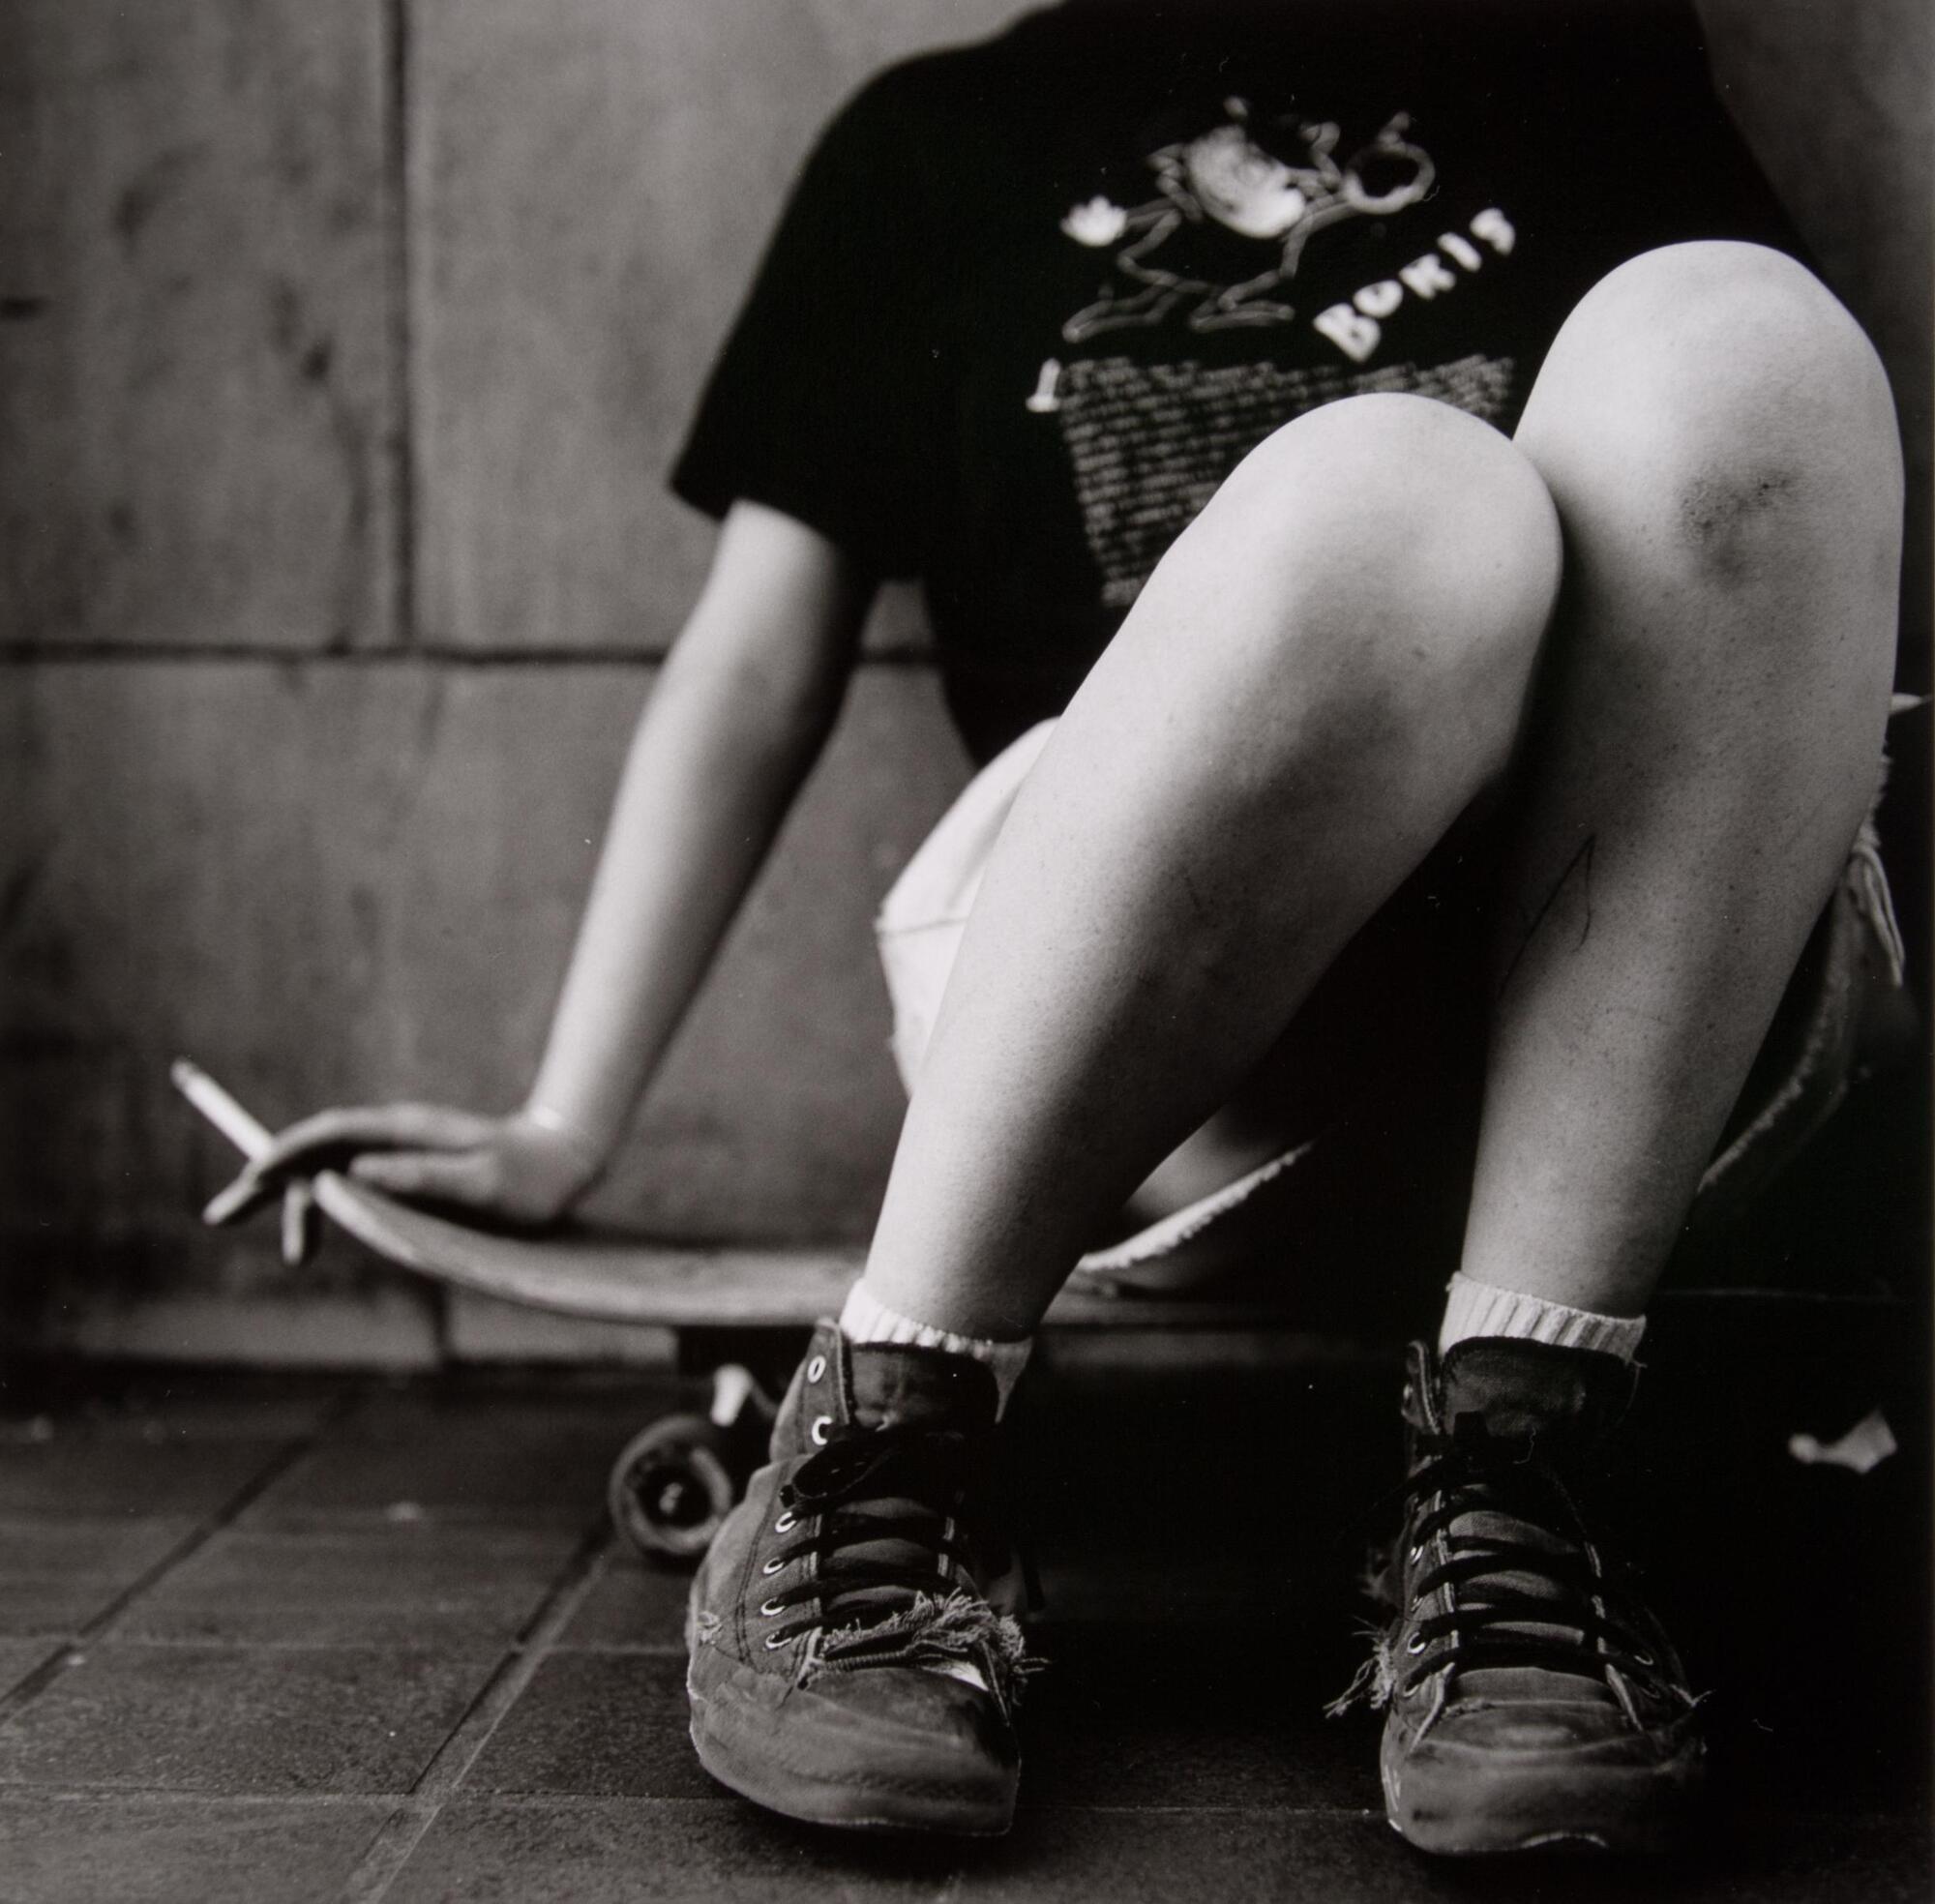 A boy sitting on a skateboard with his head down, smoking a cigarette held in his right hand.